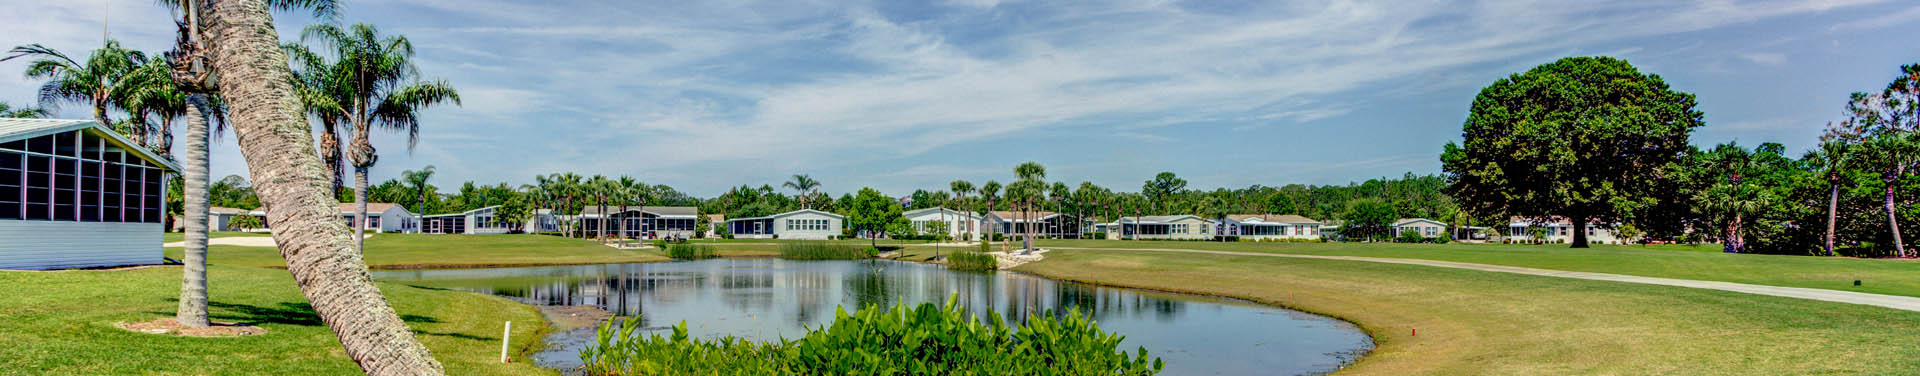 Photo of Green grass, palm trees, and mobile homes that surround a retention pond in the middle of the community